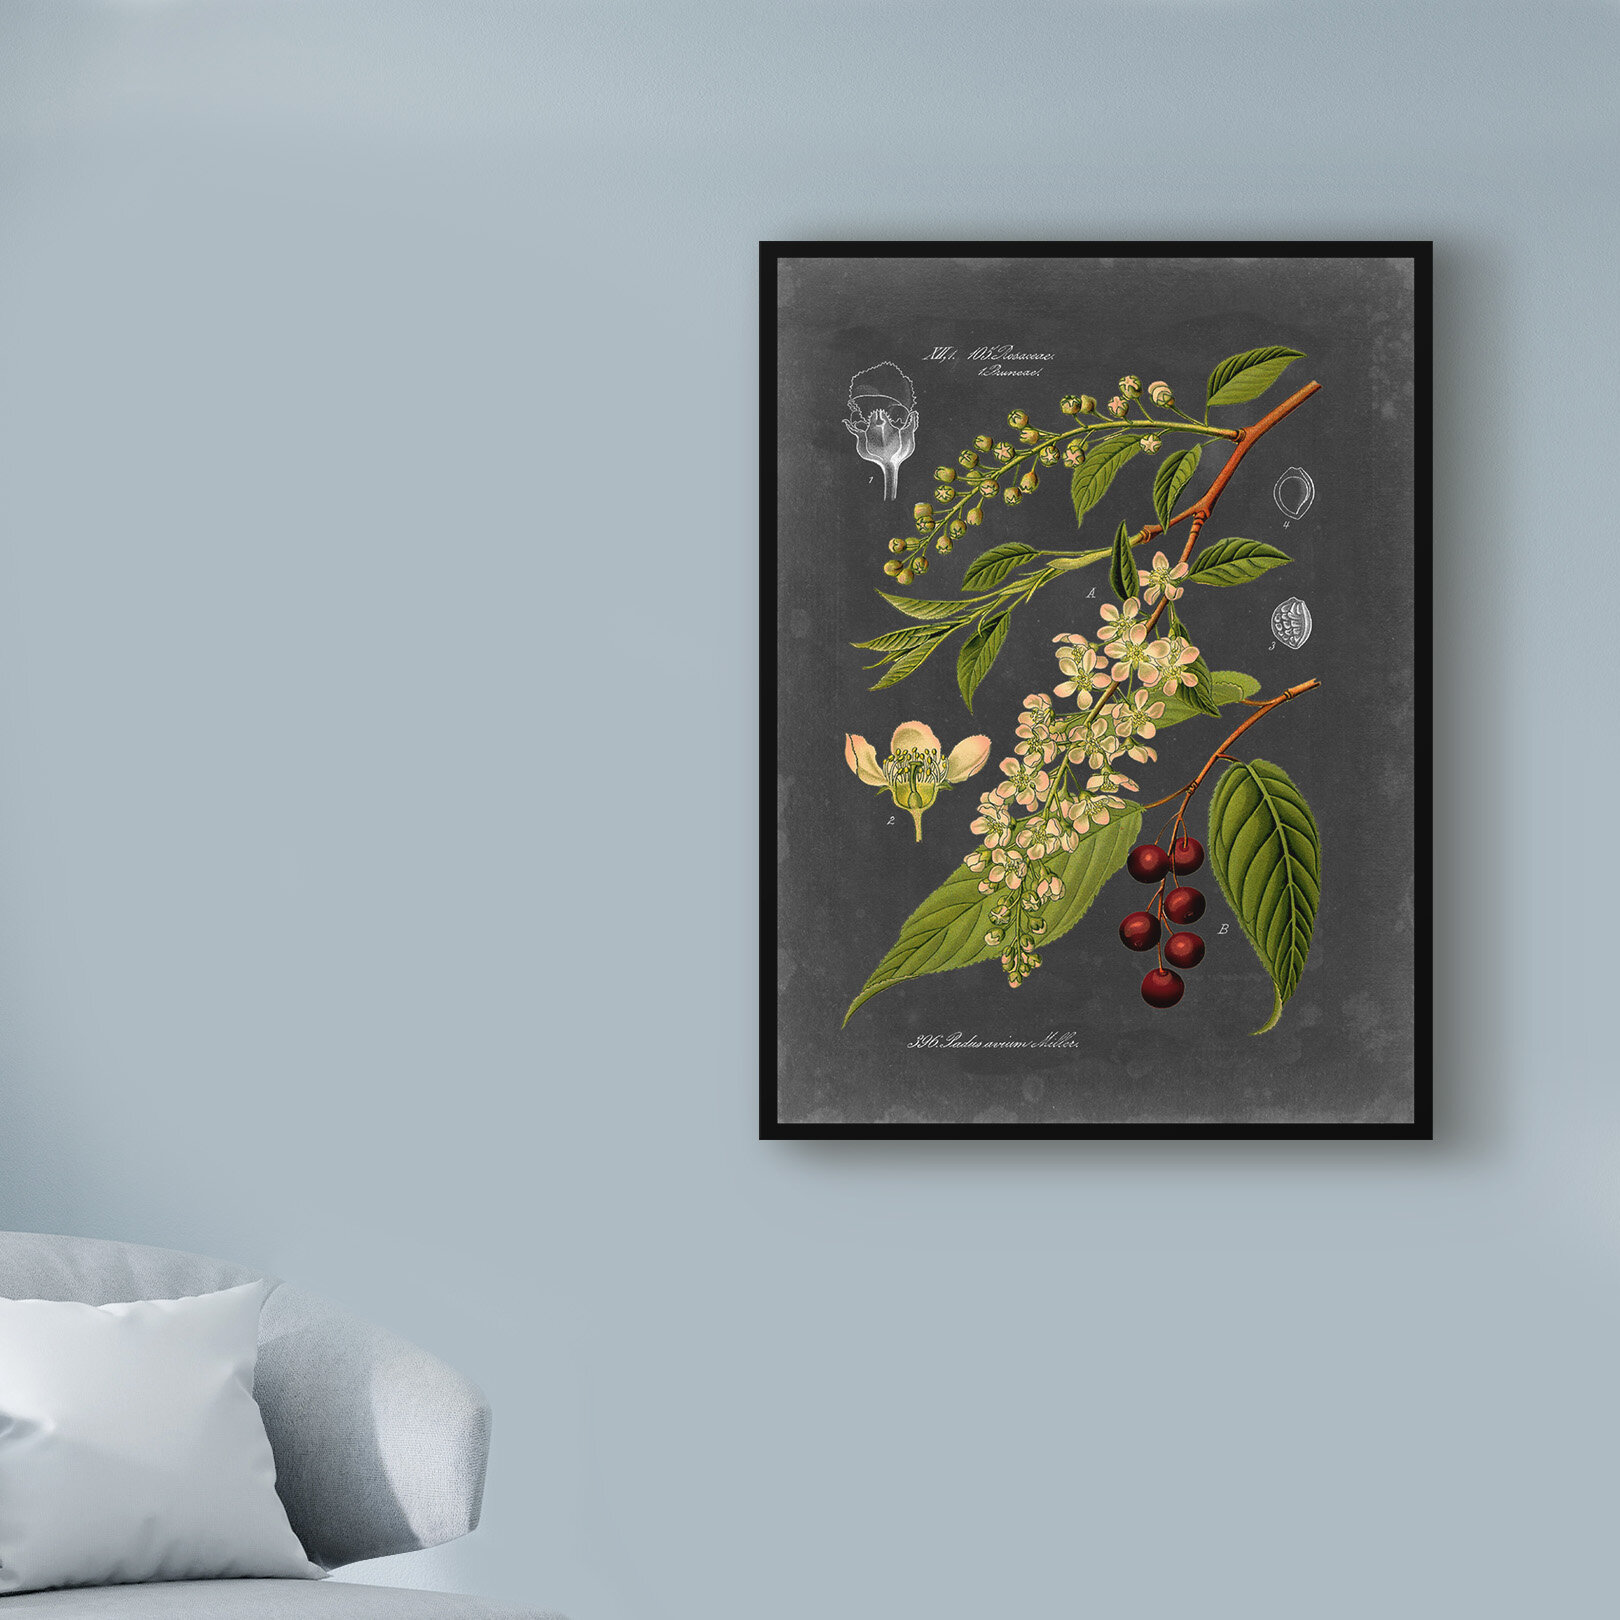 Charlton Home® Midnight Botanical II On Canvas by Vision Studio Print &  Reviews